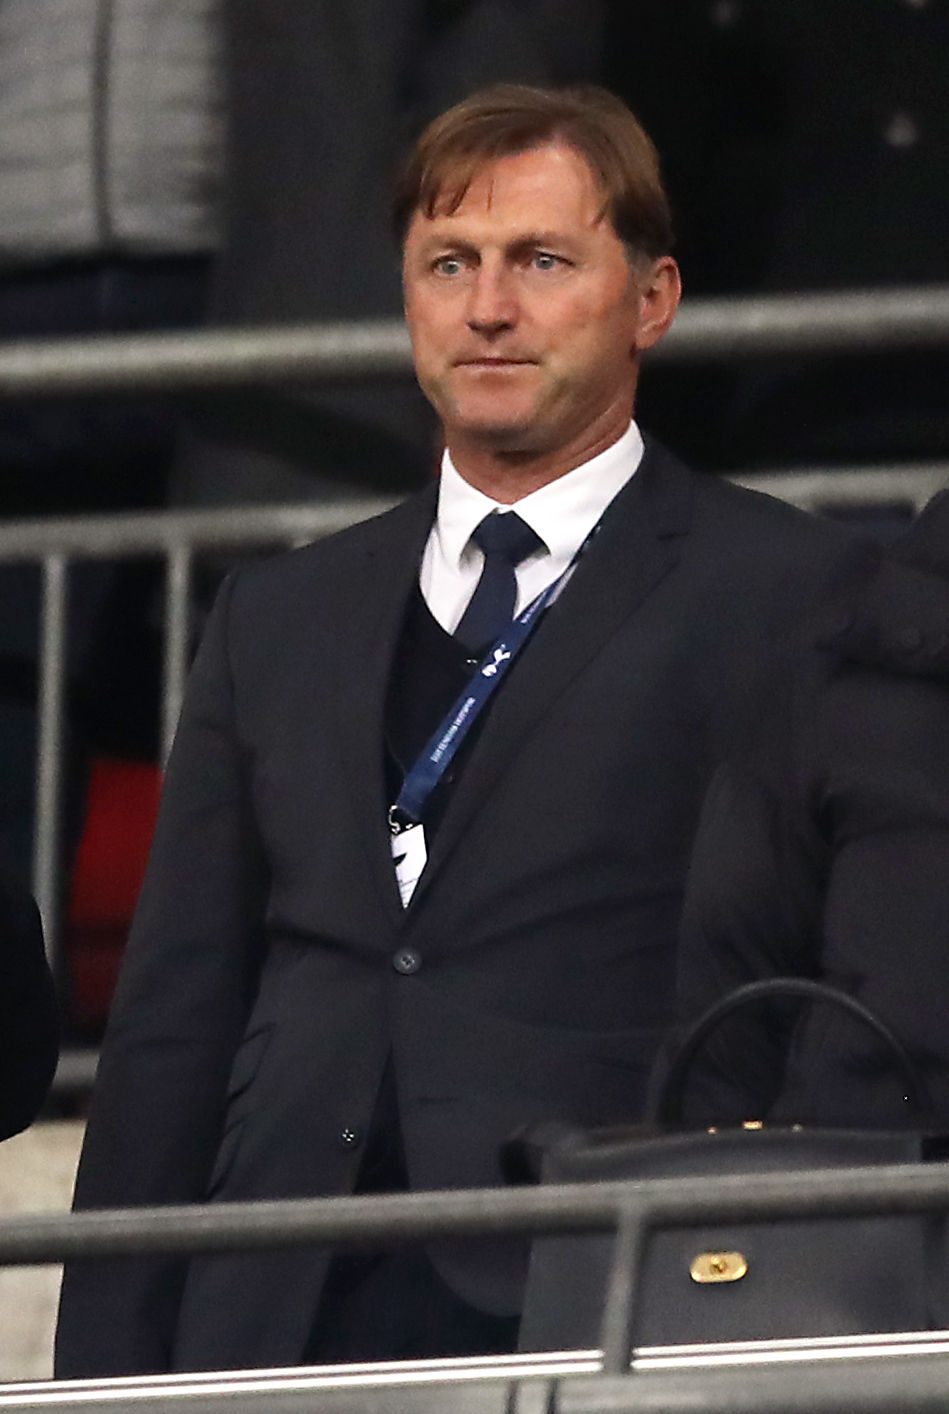 THE VERDICT: Hasenhuttl has much to do after positive appointment